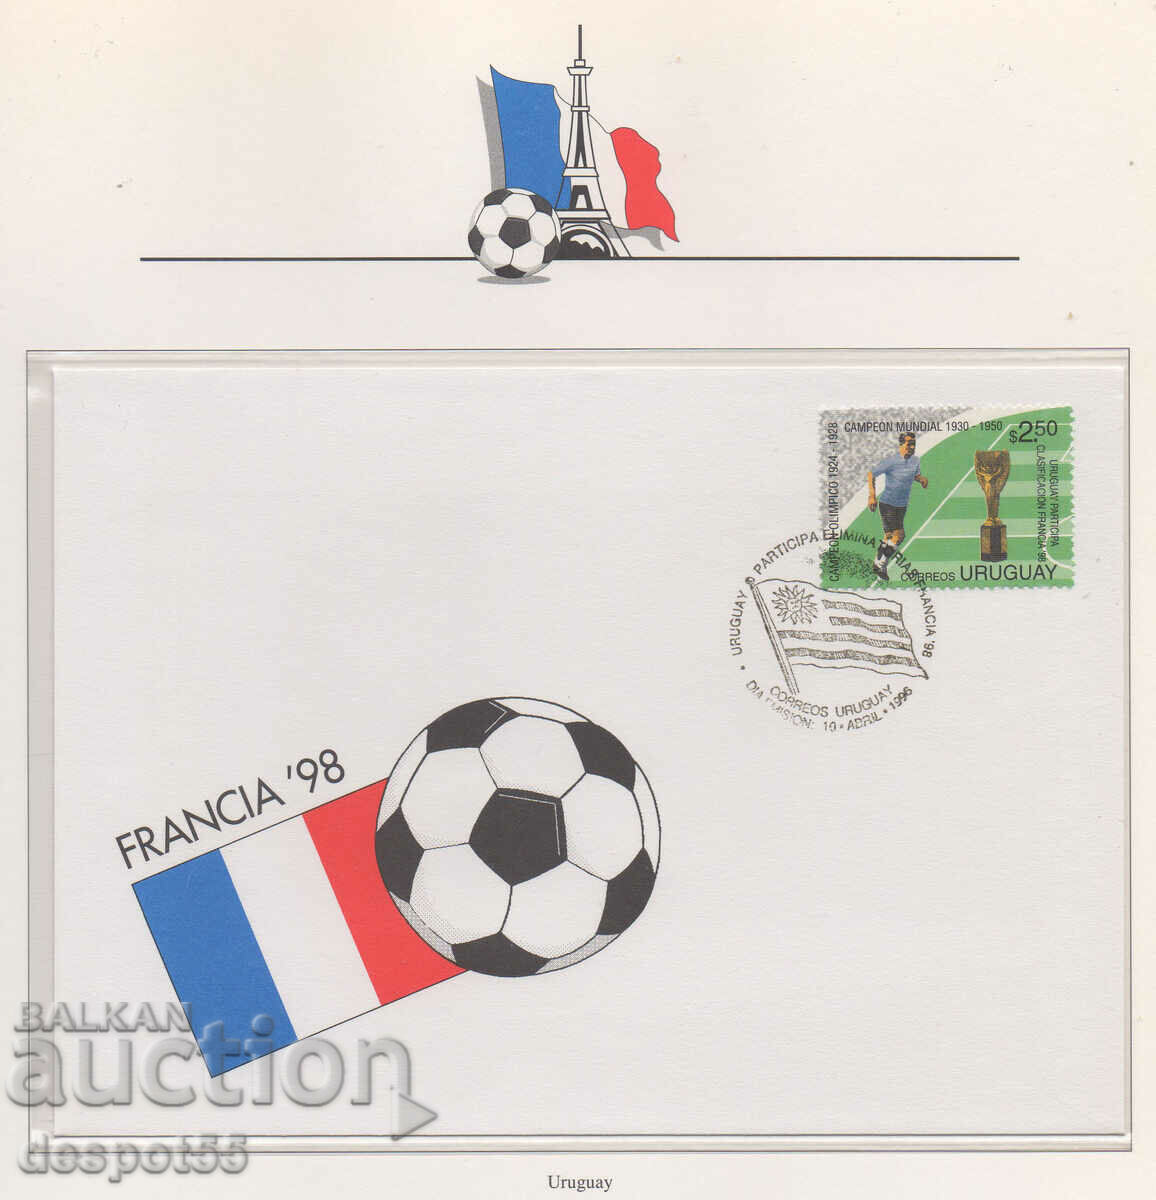 1996. Uruguay. World Cup in football - France '98. An envelope.